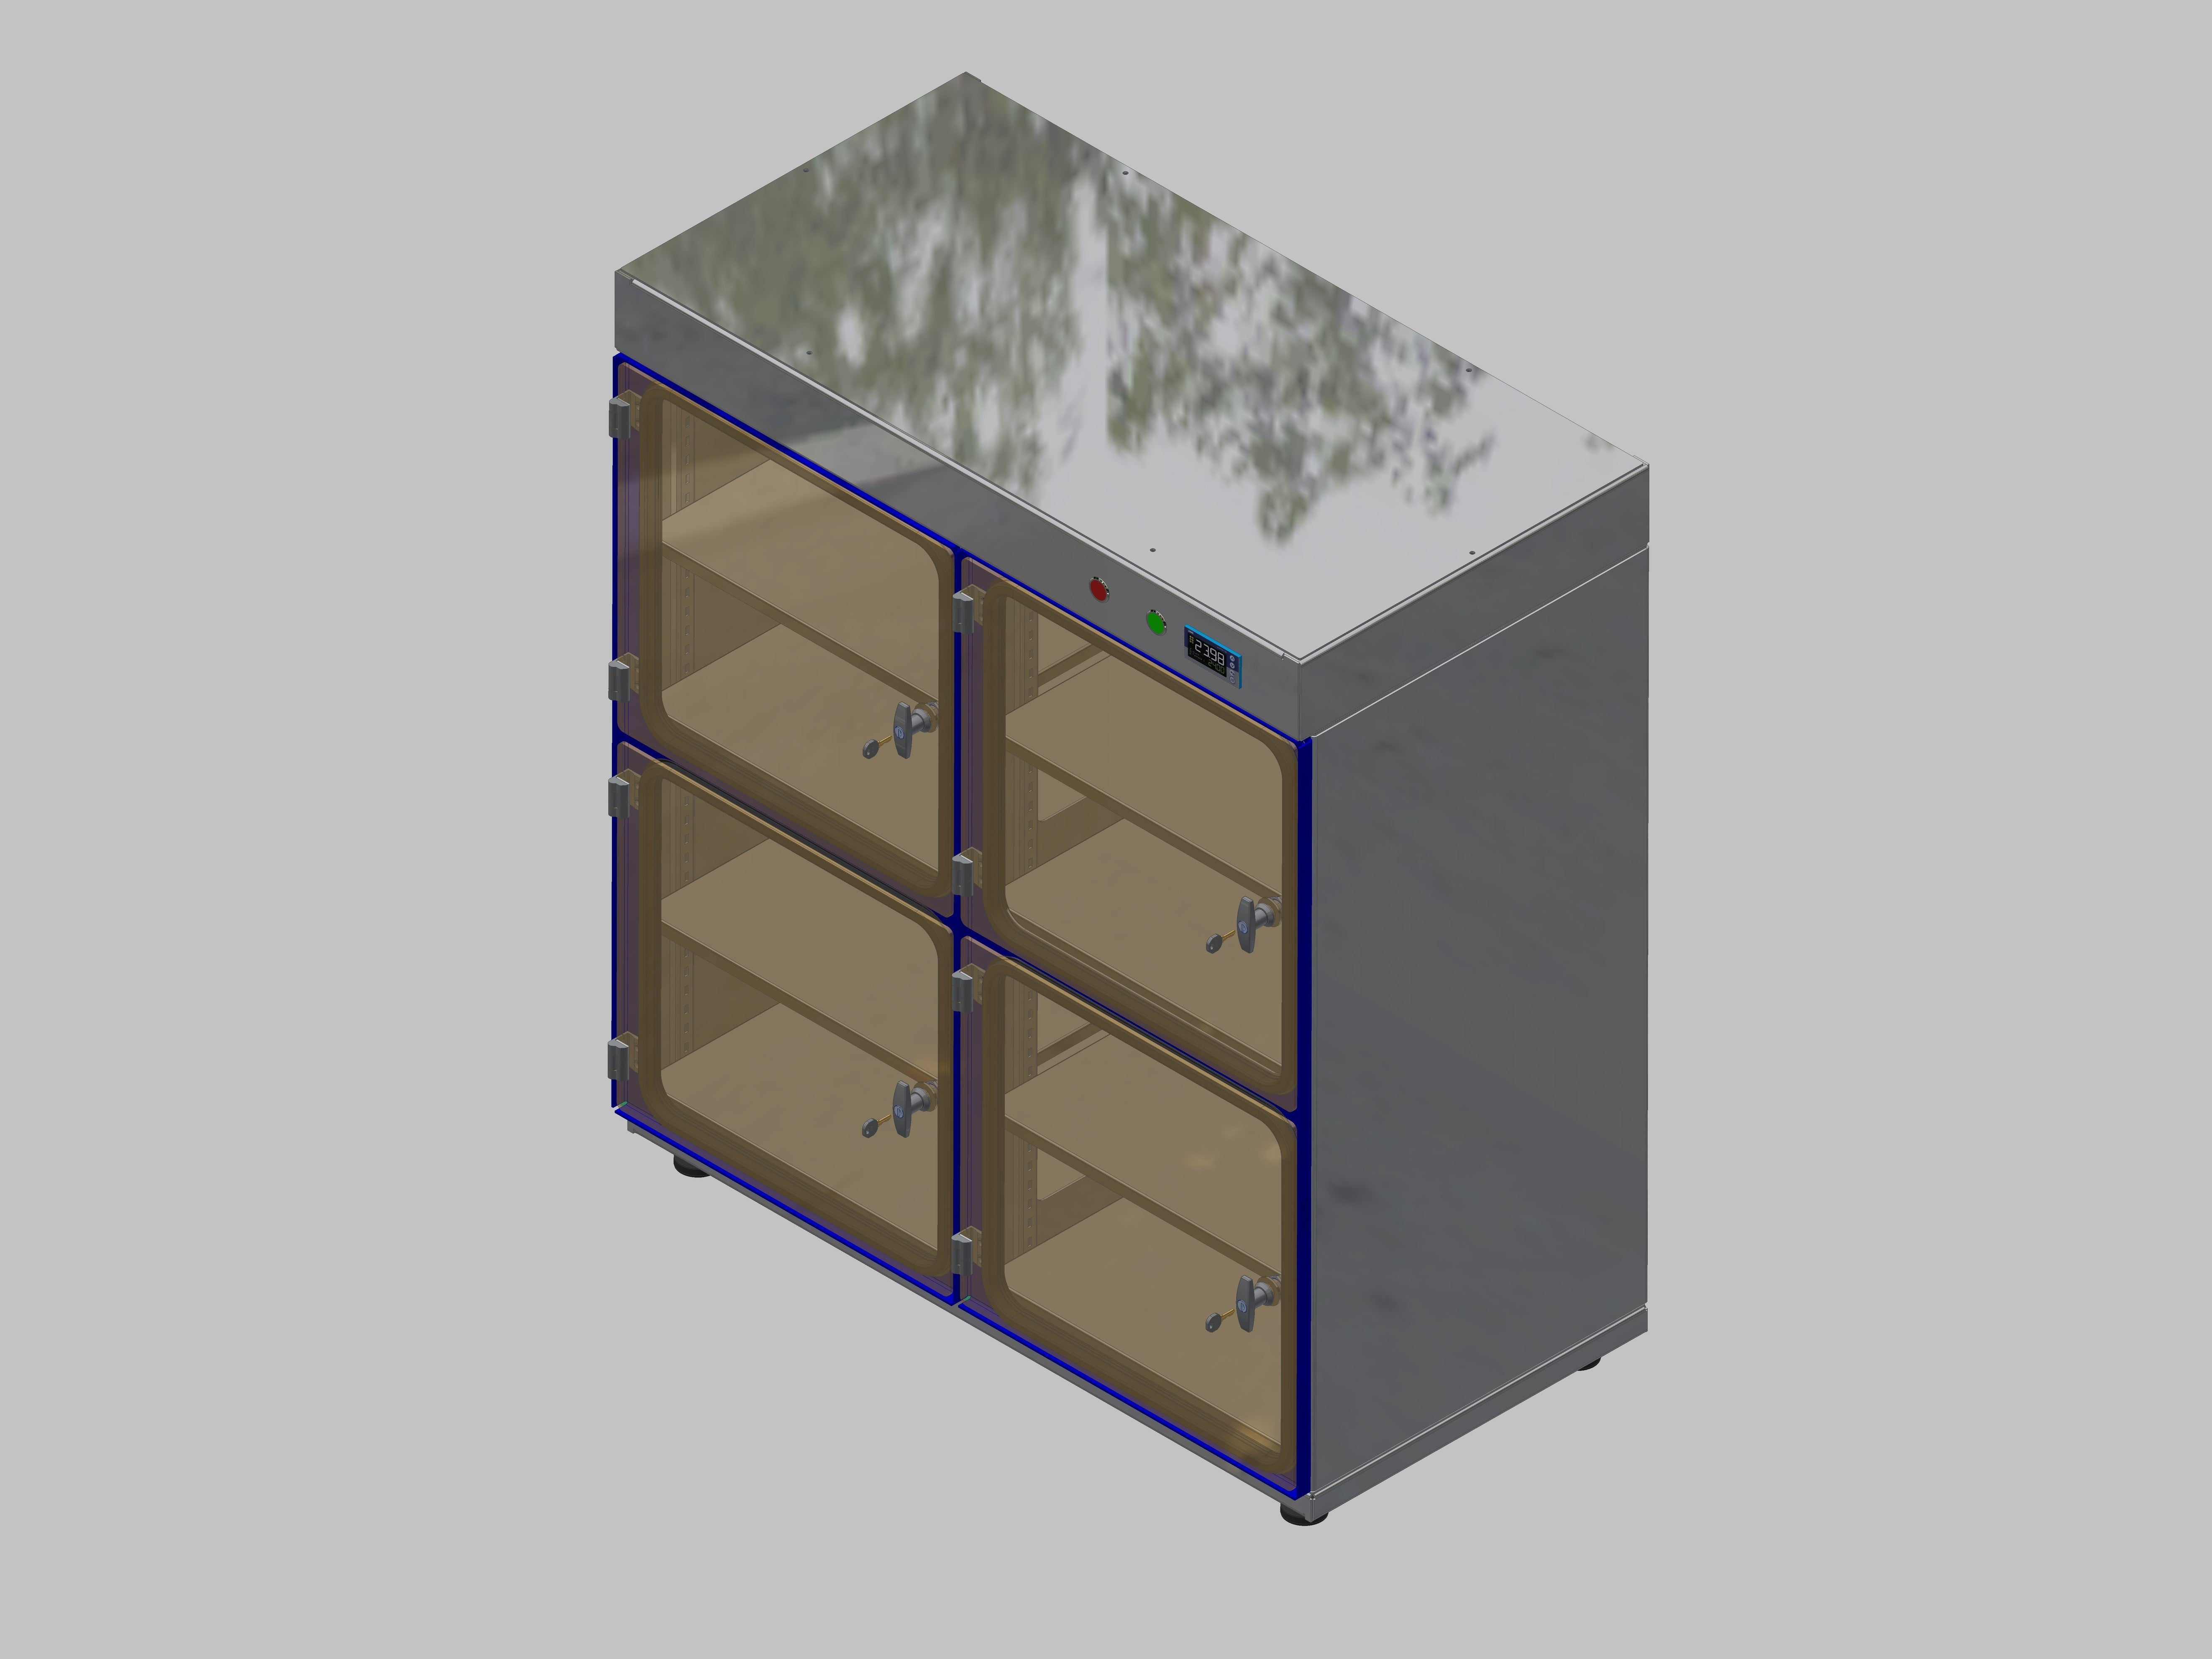 Dry storage cabinet-ITN-1200-4 with 2 shelves per compartment and base design with adjustable feet